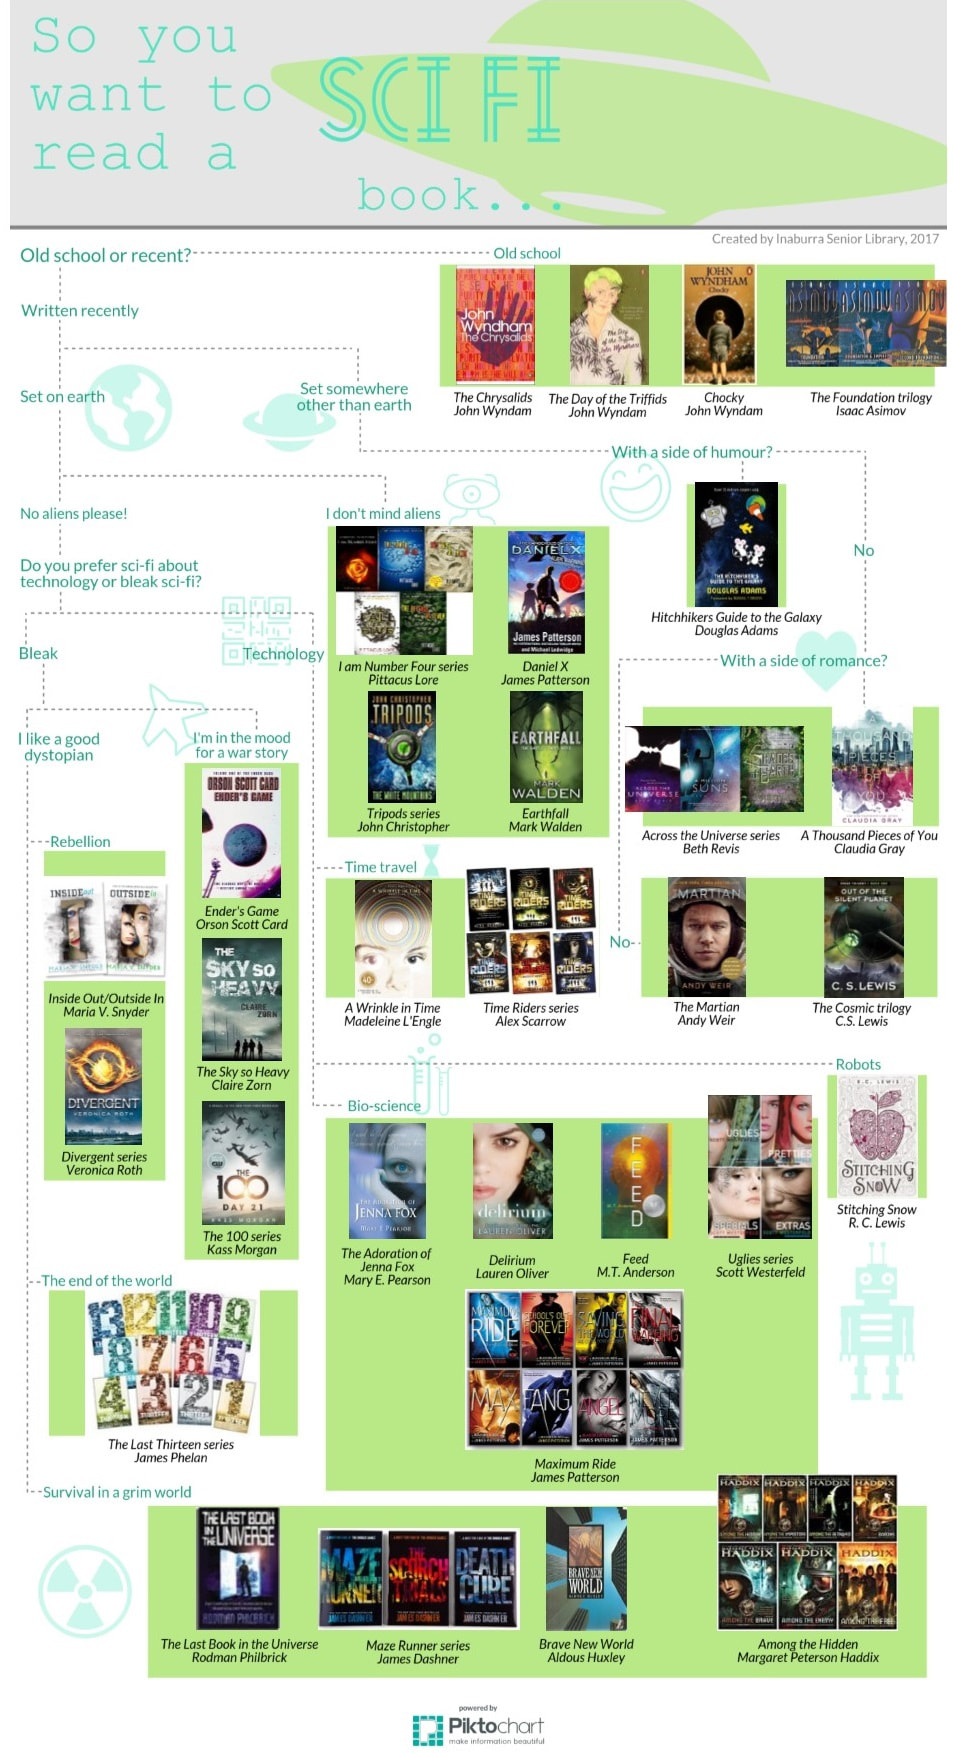 Flow chart with reading recommendations for sci-fi